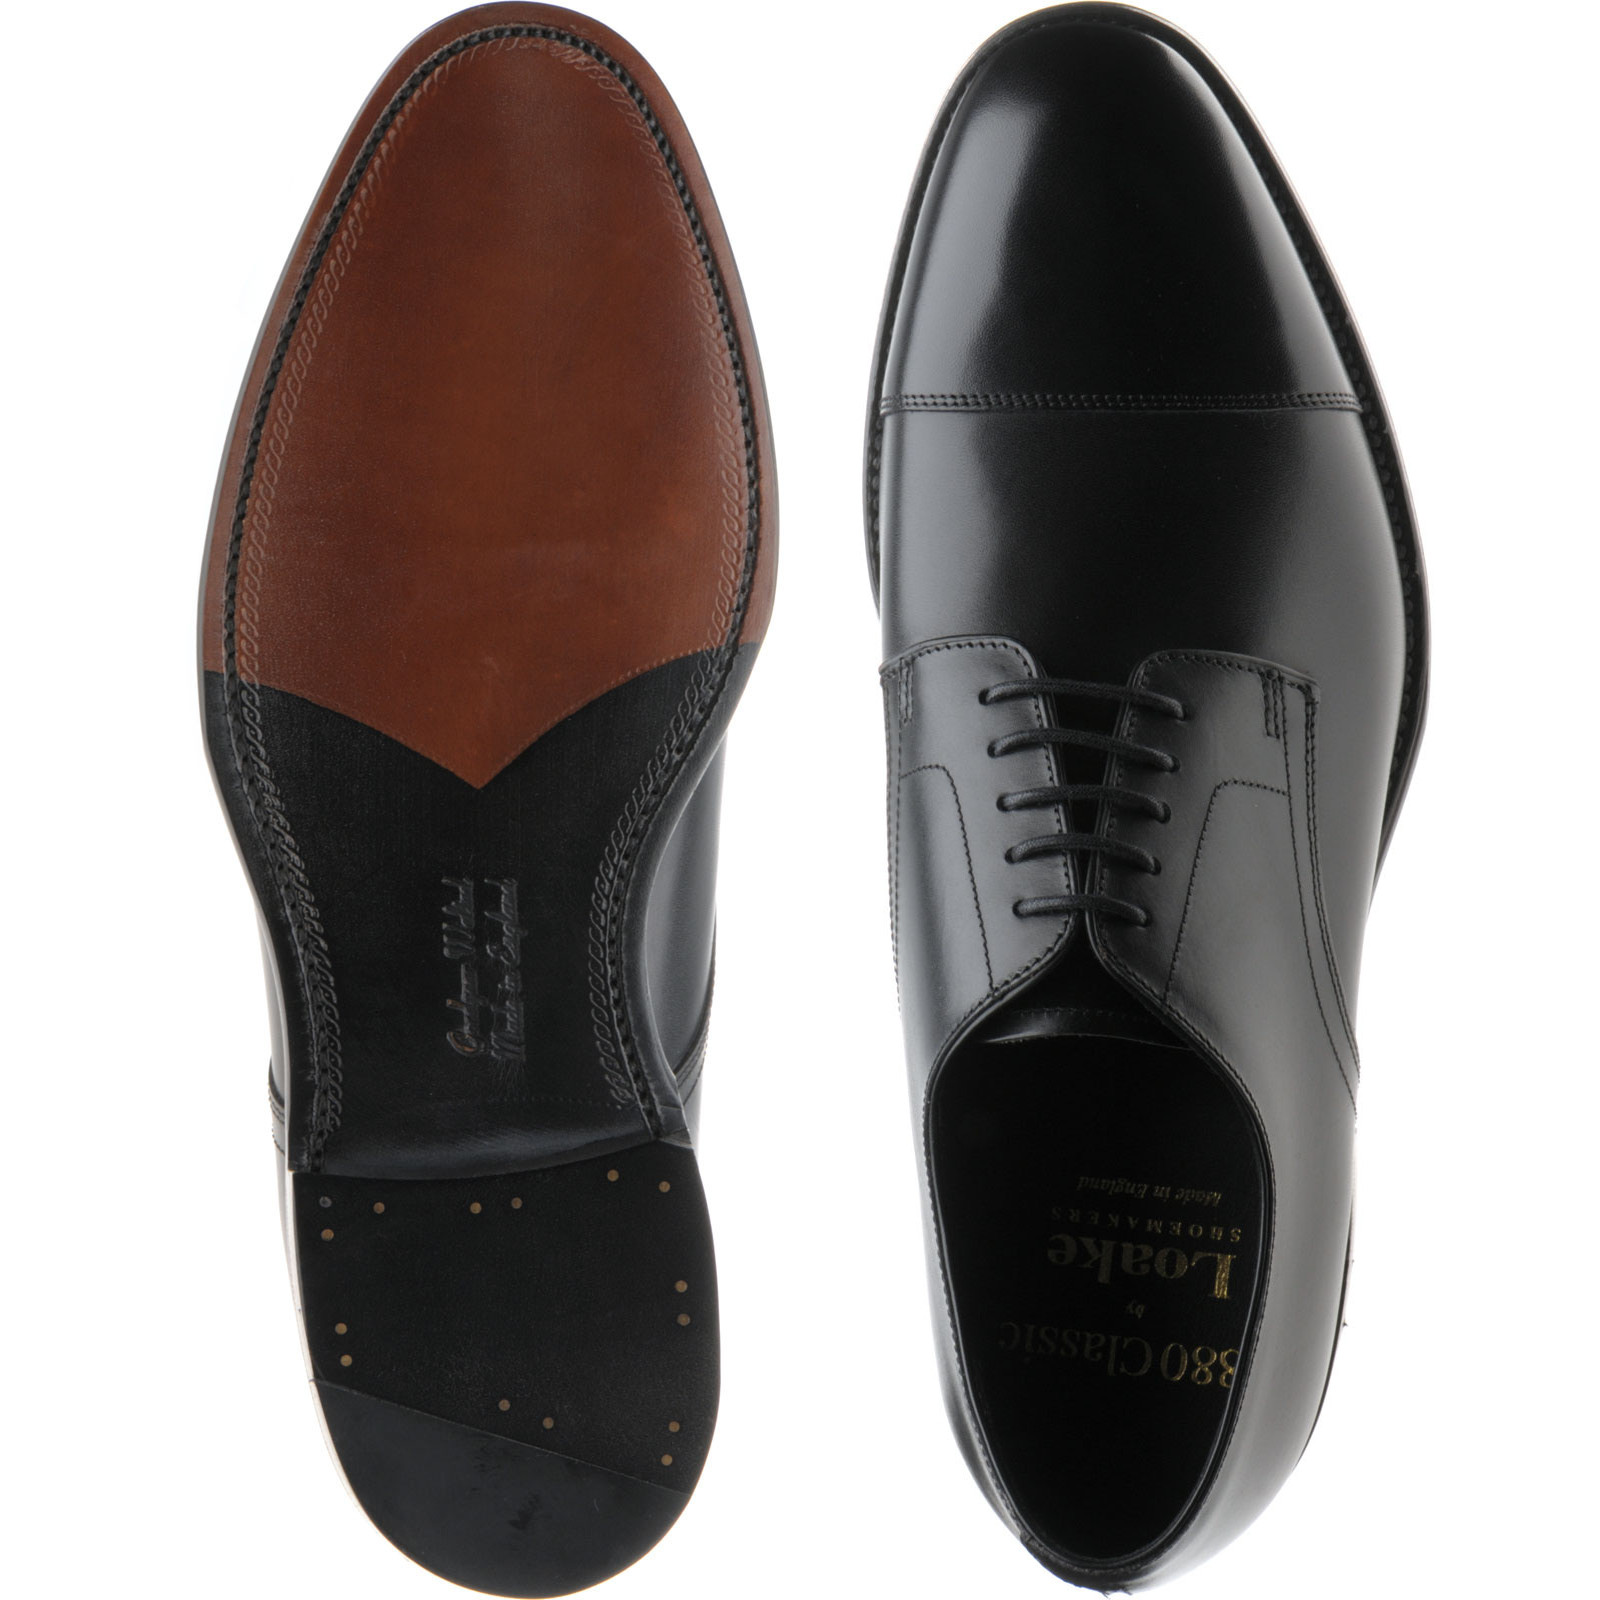 Loake shoes | Loake 1880 | Petergate in Carbon Black Calf at Herring Shoes